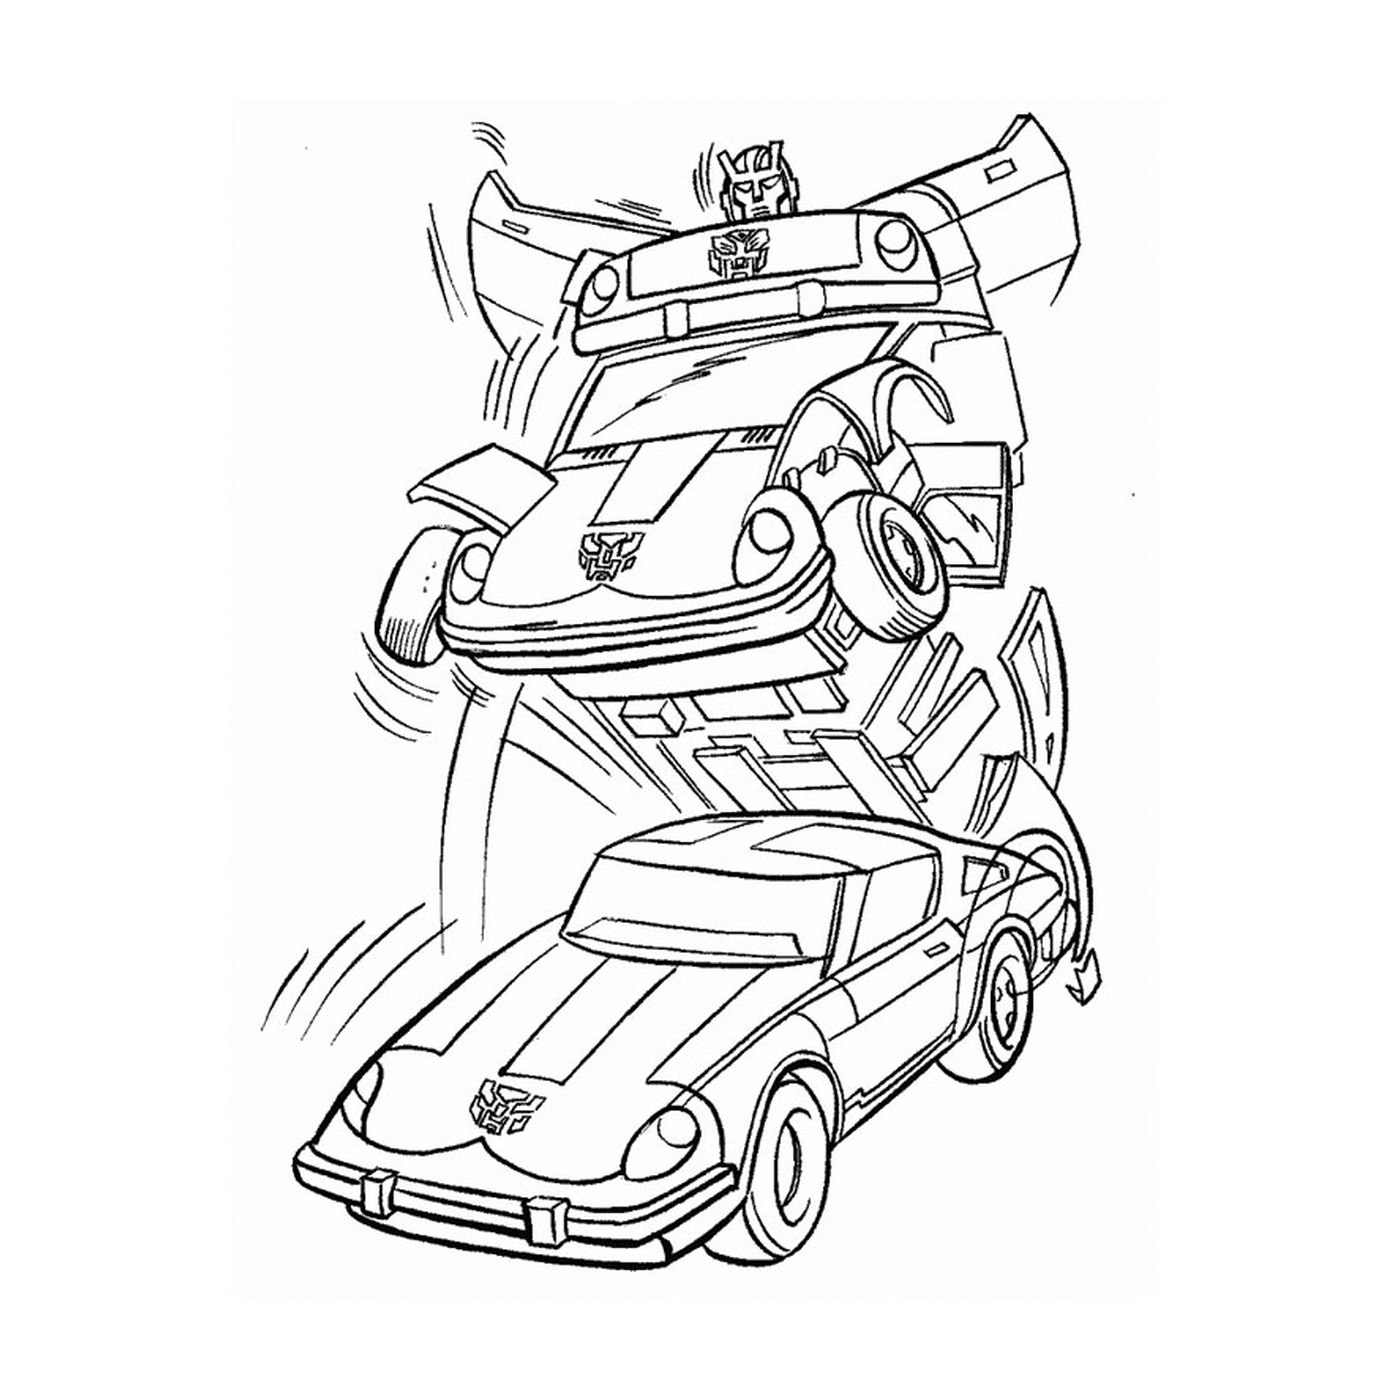  Car and giant robot 